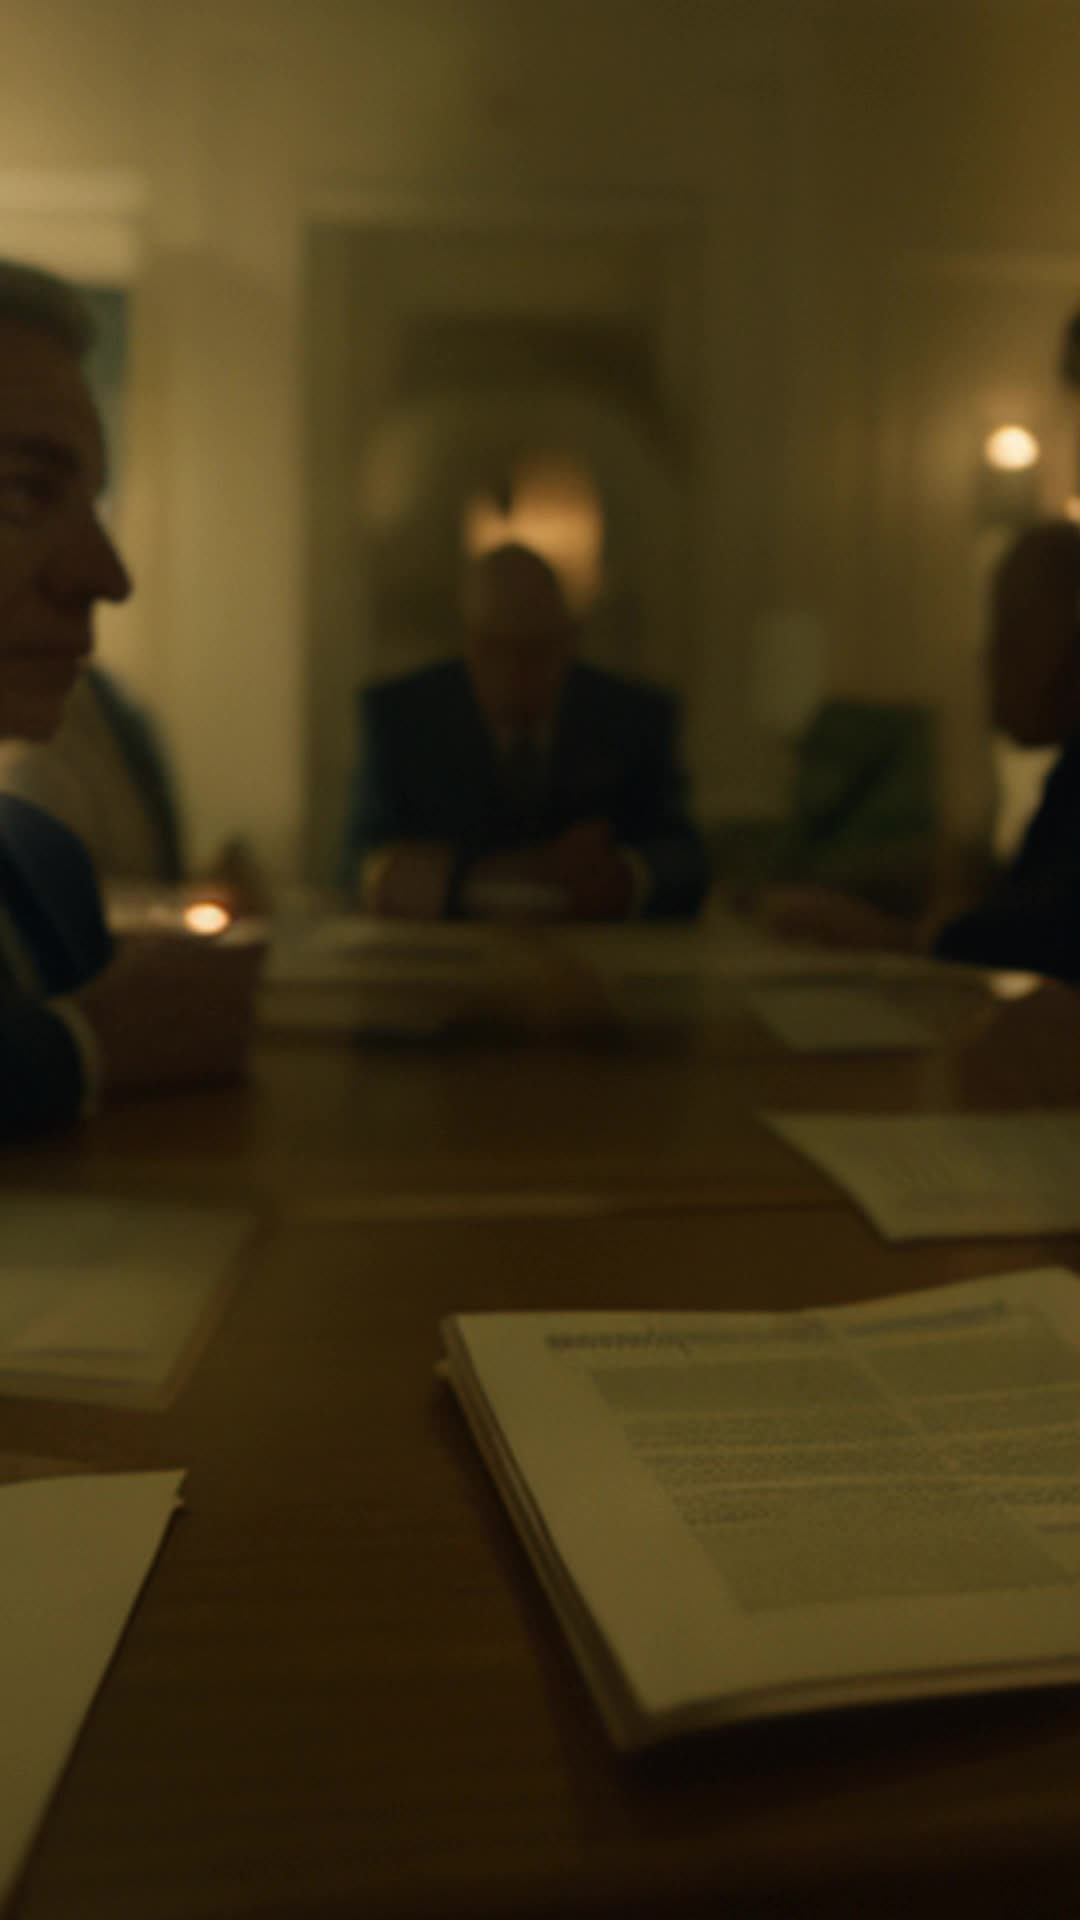 Flickering candlelight, journalists poring over documents, wide-eyed shock, audacious Federal Reserve scheme, dimly lit room, shadows cast on walls, documentary-style, sharp focus, soft shadows